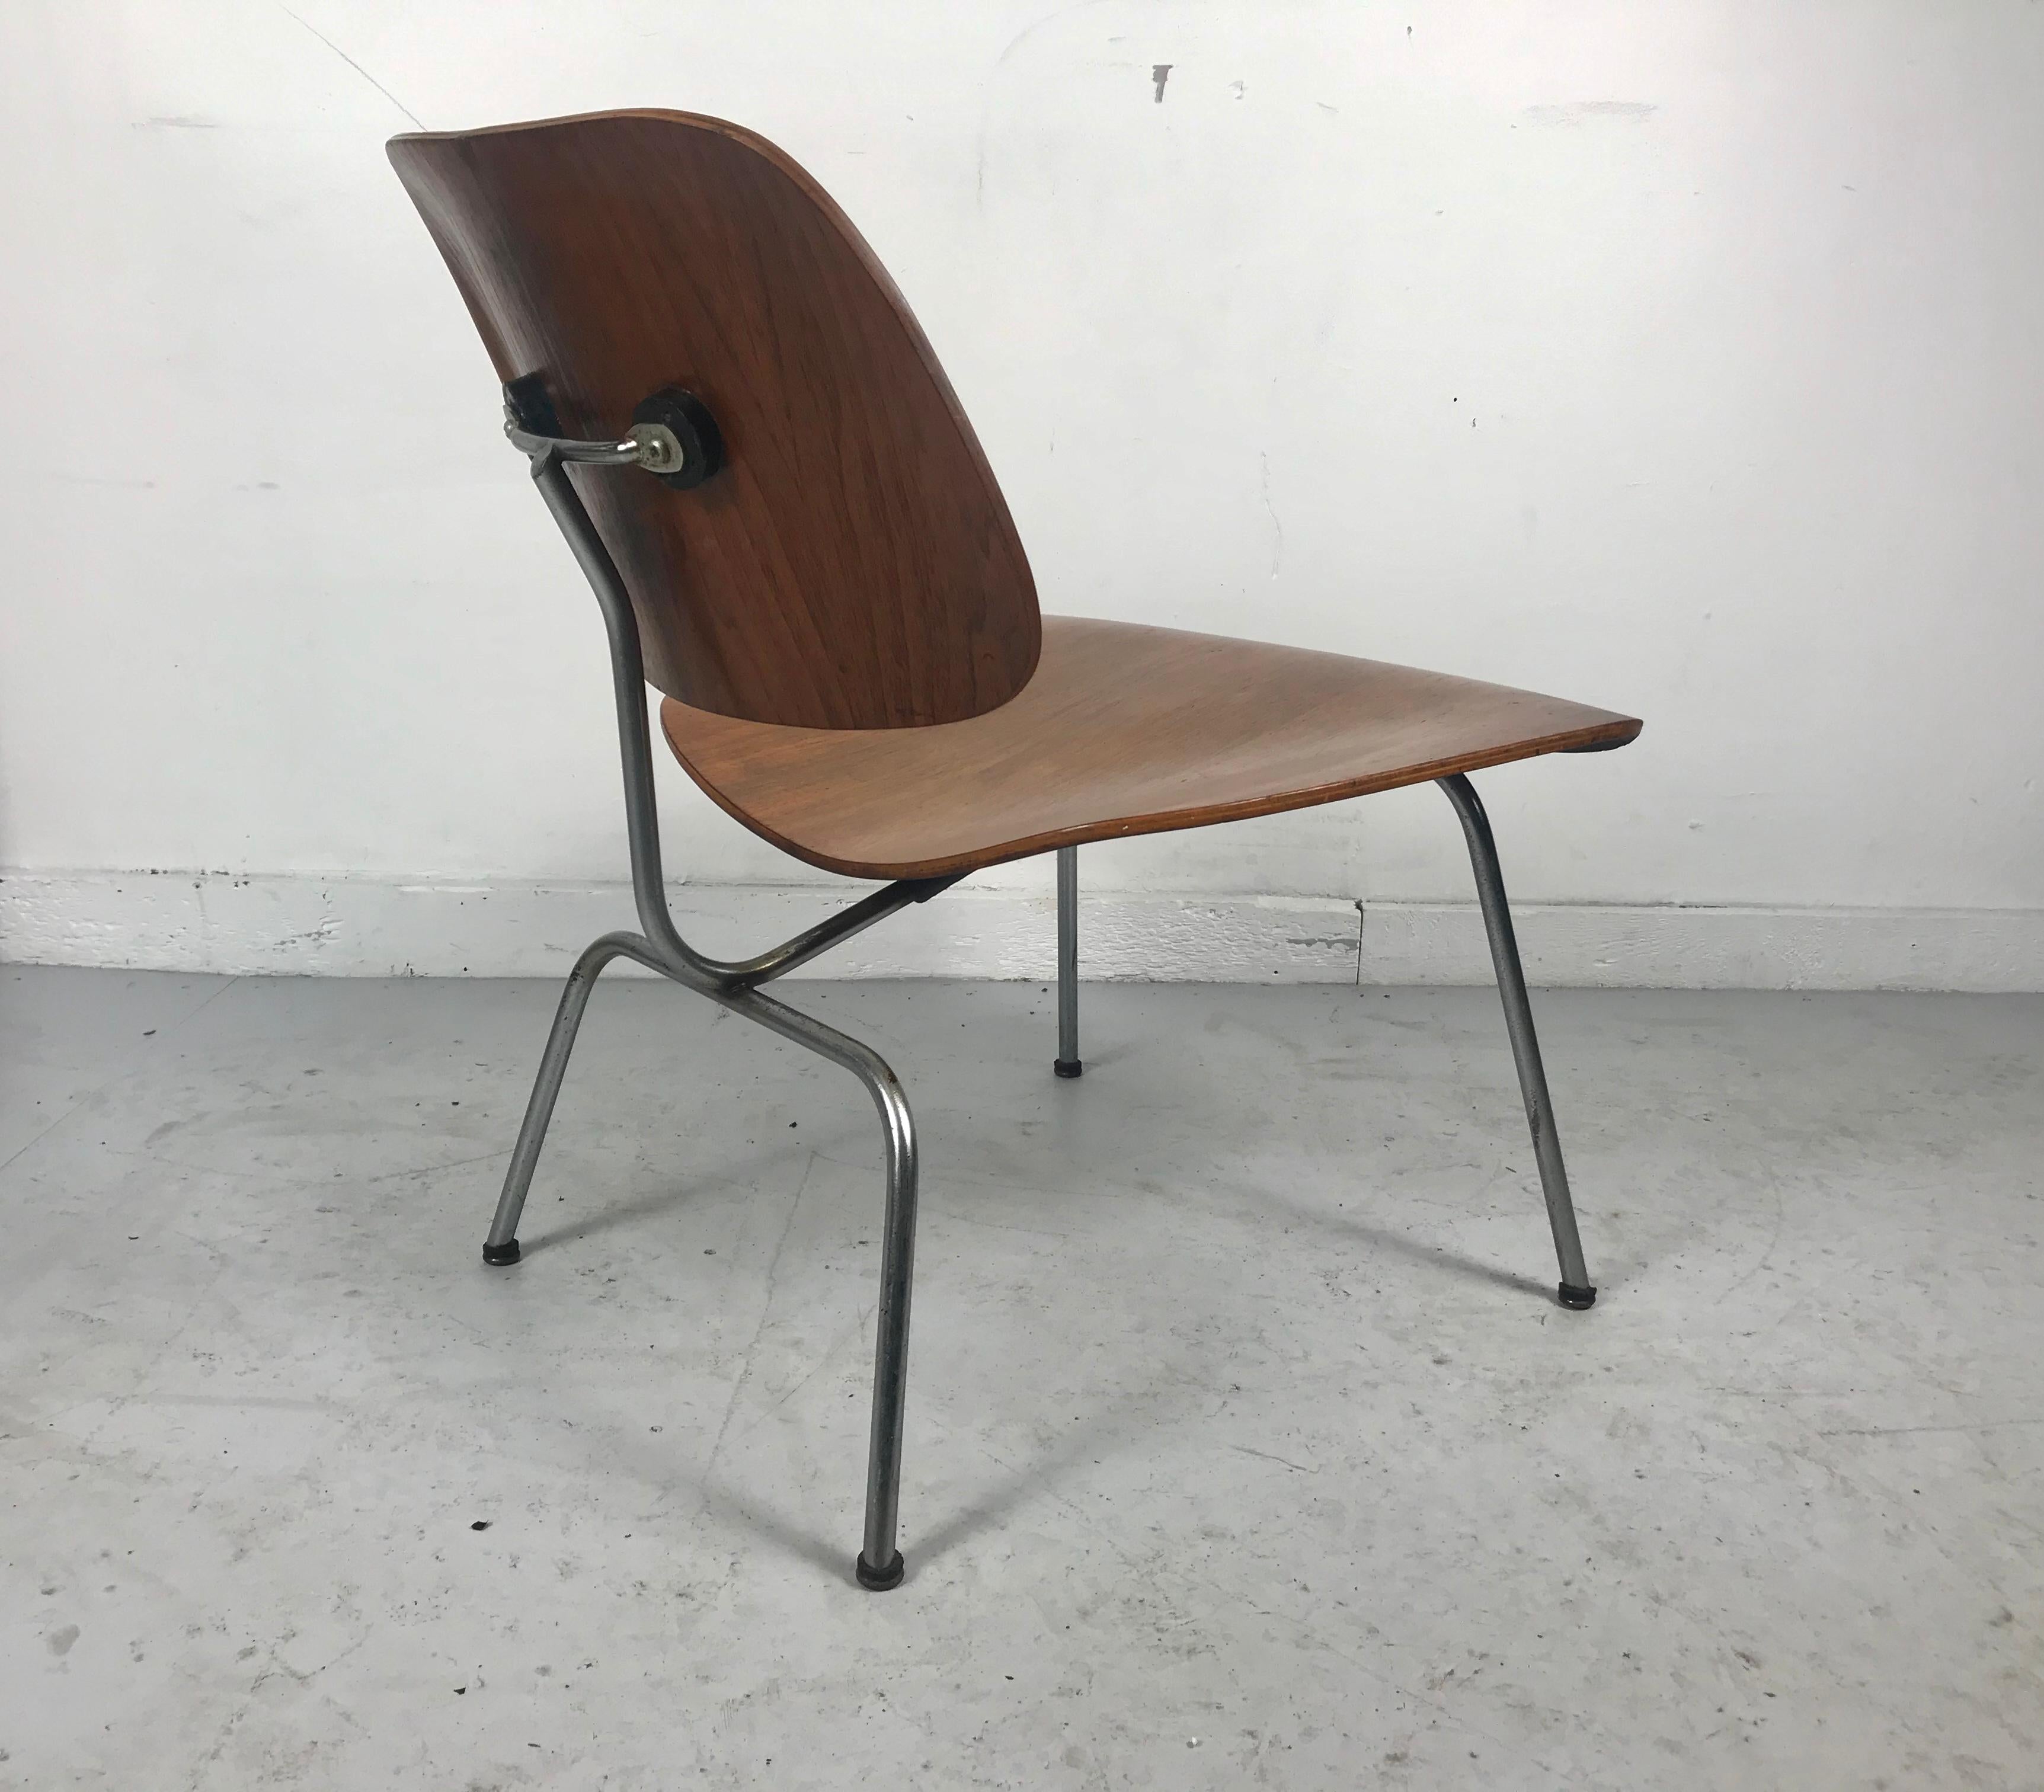 American Early Production Charles Eames LCM 'Lounge Chair Metal', Original Label